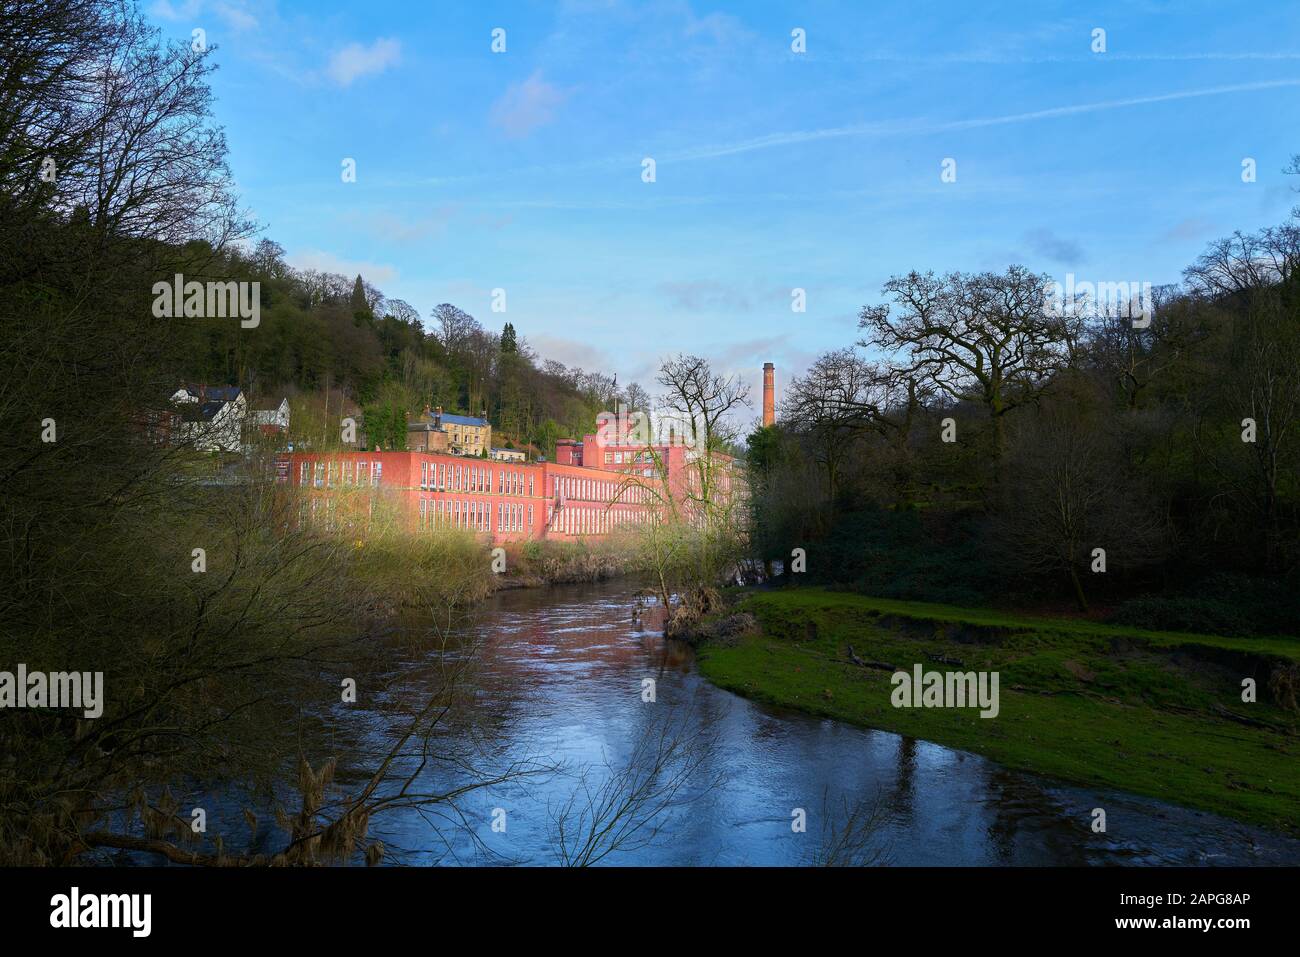 Sir Richard Arkwright’s Masson Mill, a cotton manufacturing mill built in orange red brick in the 18th century beside the river Derwent at Matlock Bat Stock Photo